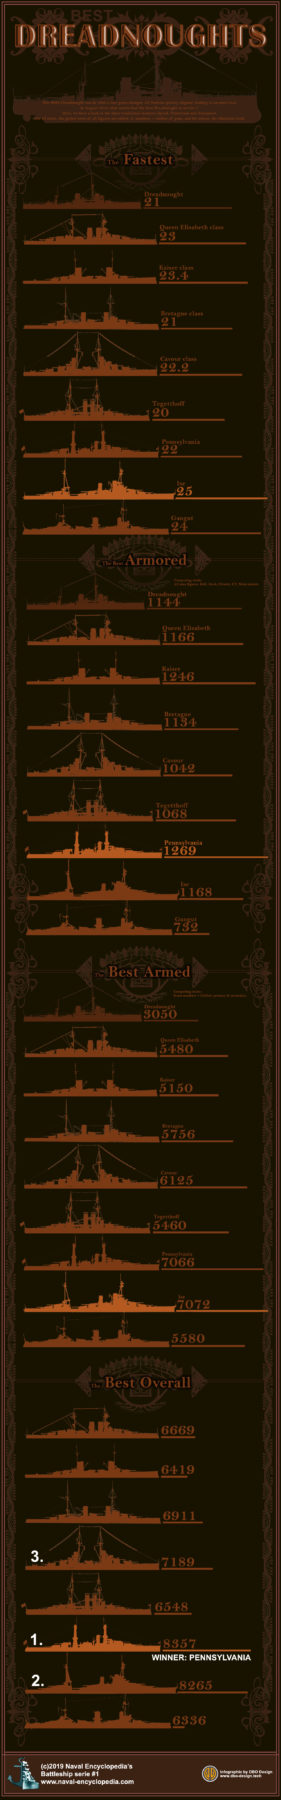 Infographic dreadnoughts